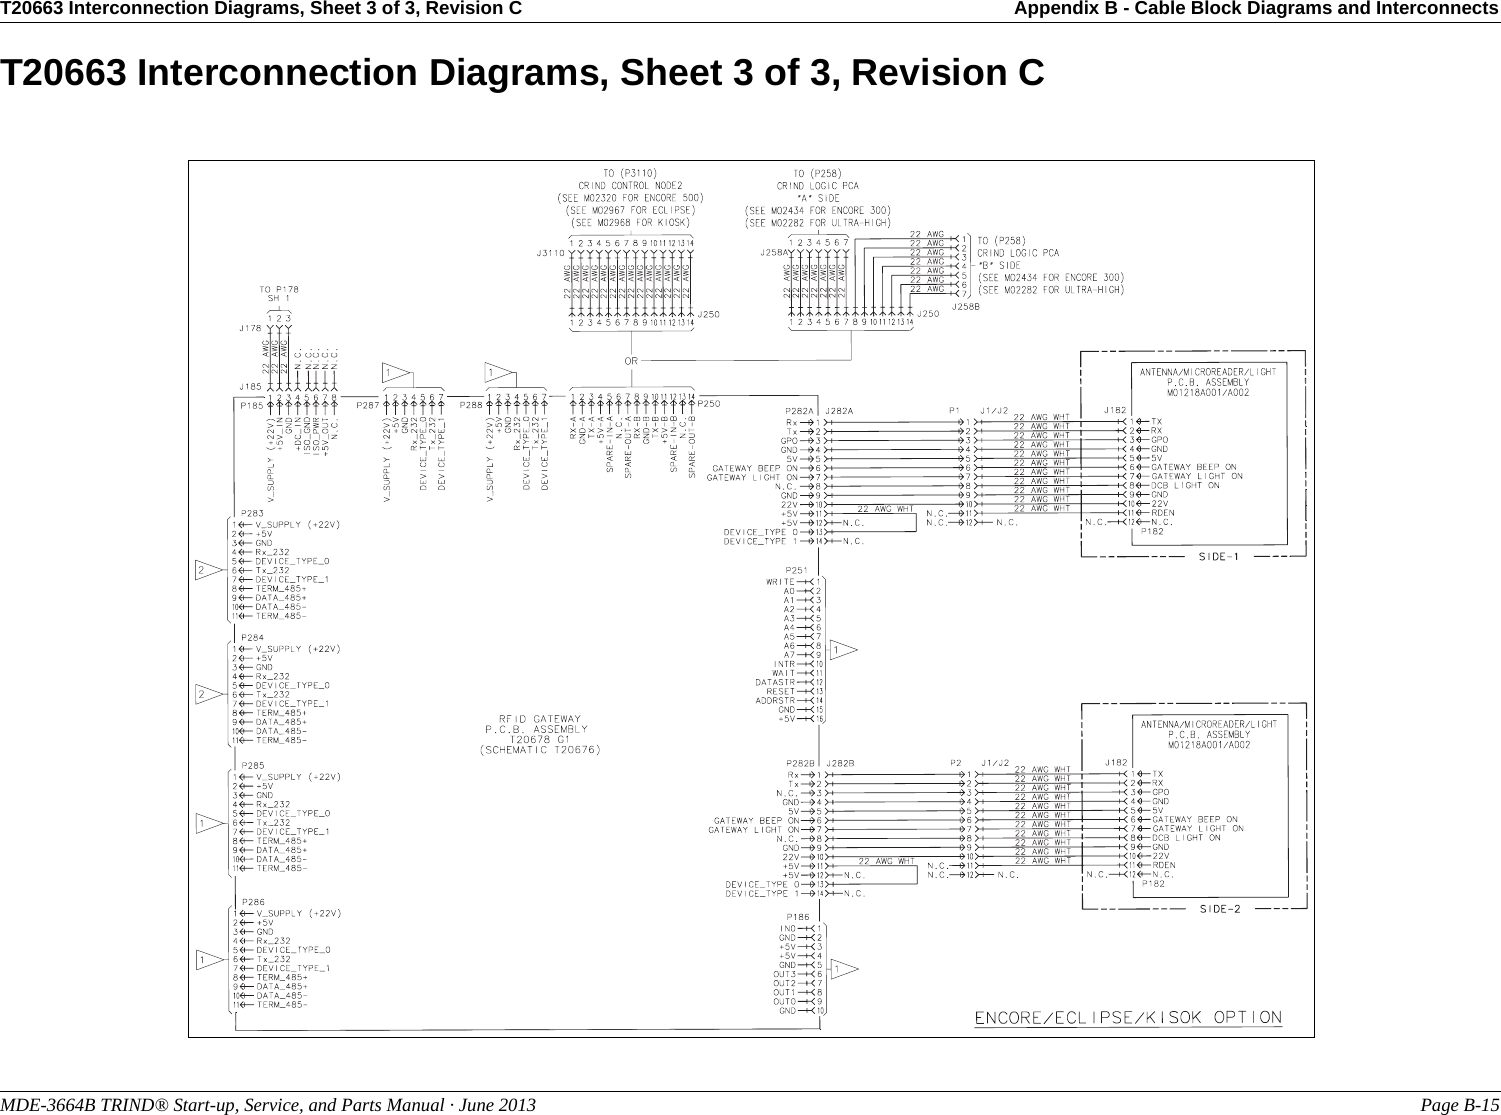 T20663 Interconnection Diagrams, Sheet 3 of 3, Revision C Appendix B - Cable Block Diagrams and InterconnectsMDE-3664B TRIND® Start-up, Service, and Parts Manual · June 2013 Page B-15T20663 Interconnection Diagrams, Sheet 3 of 3, Revision C